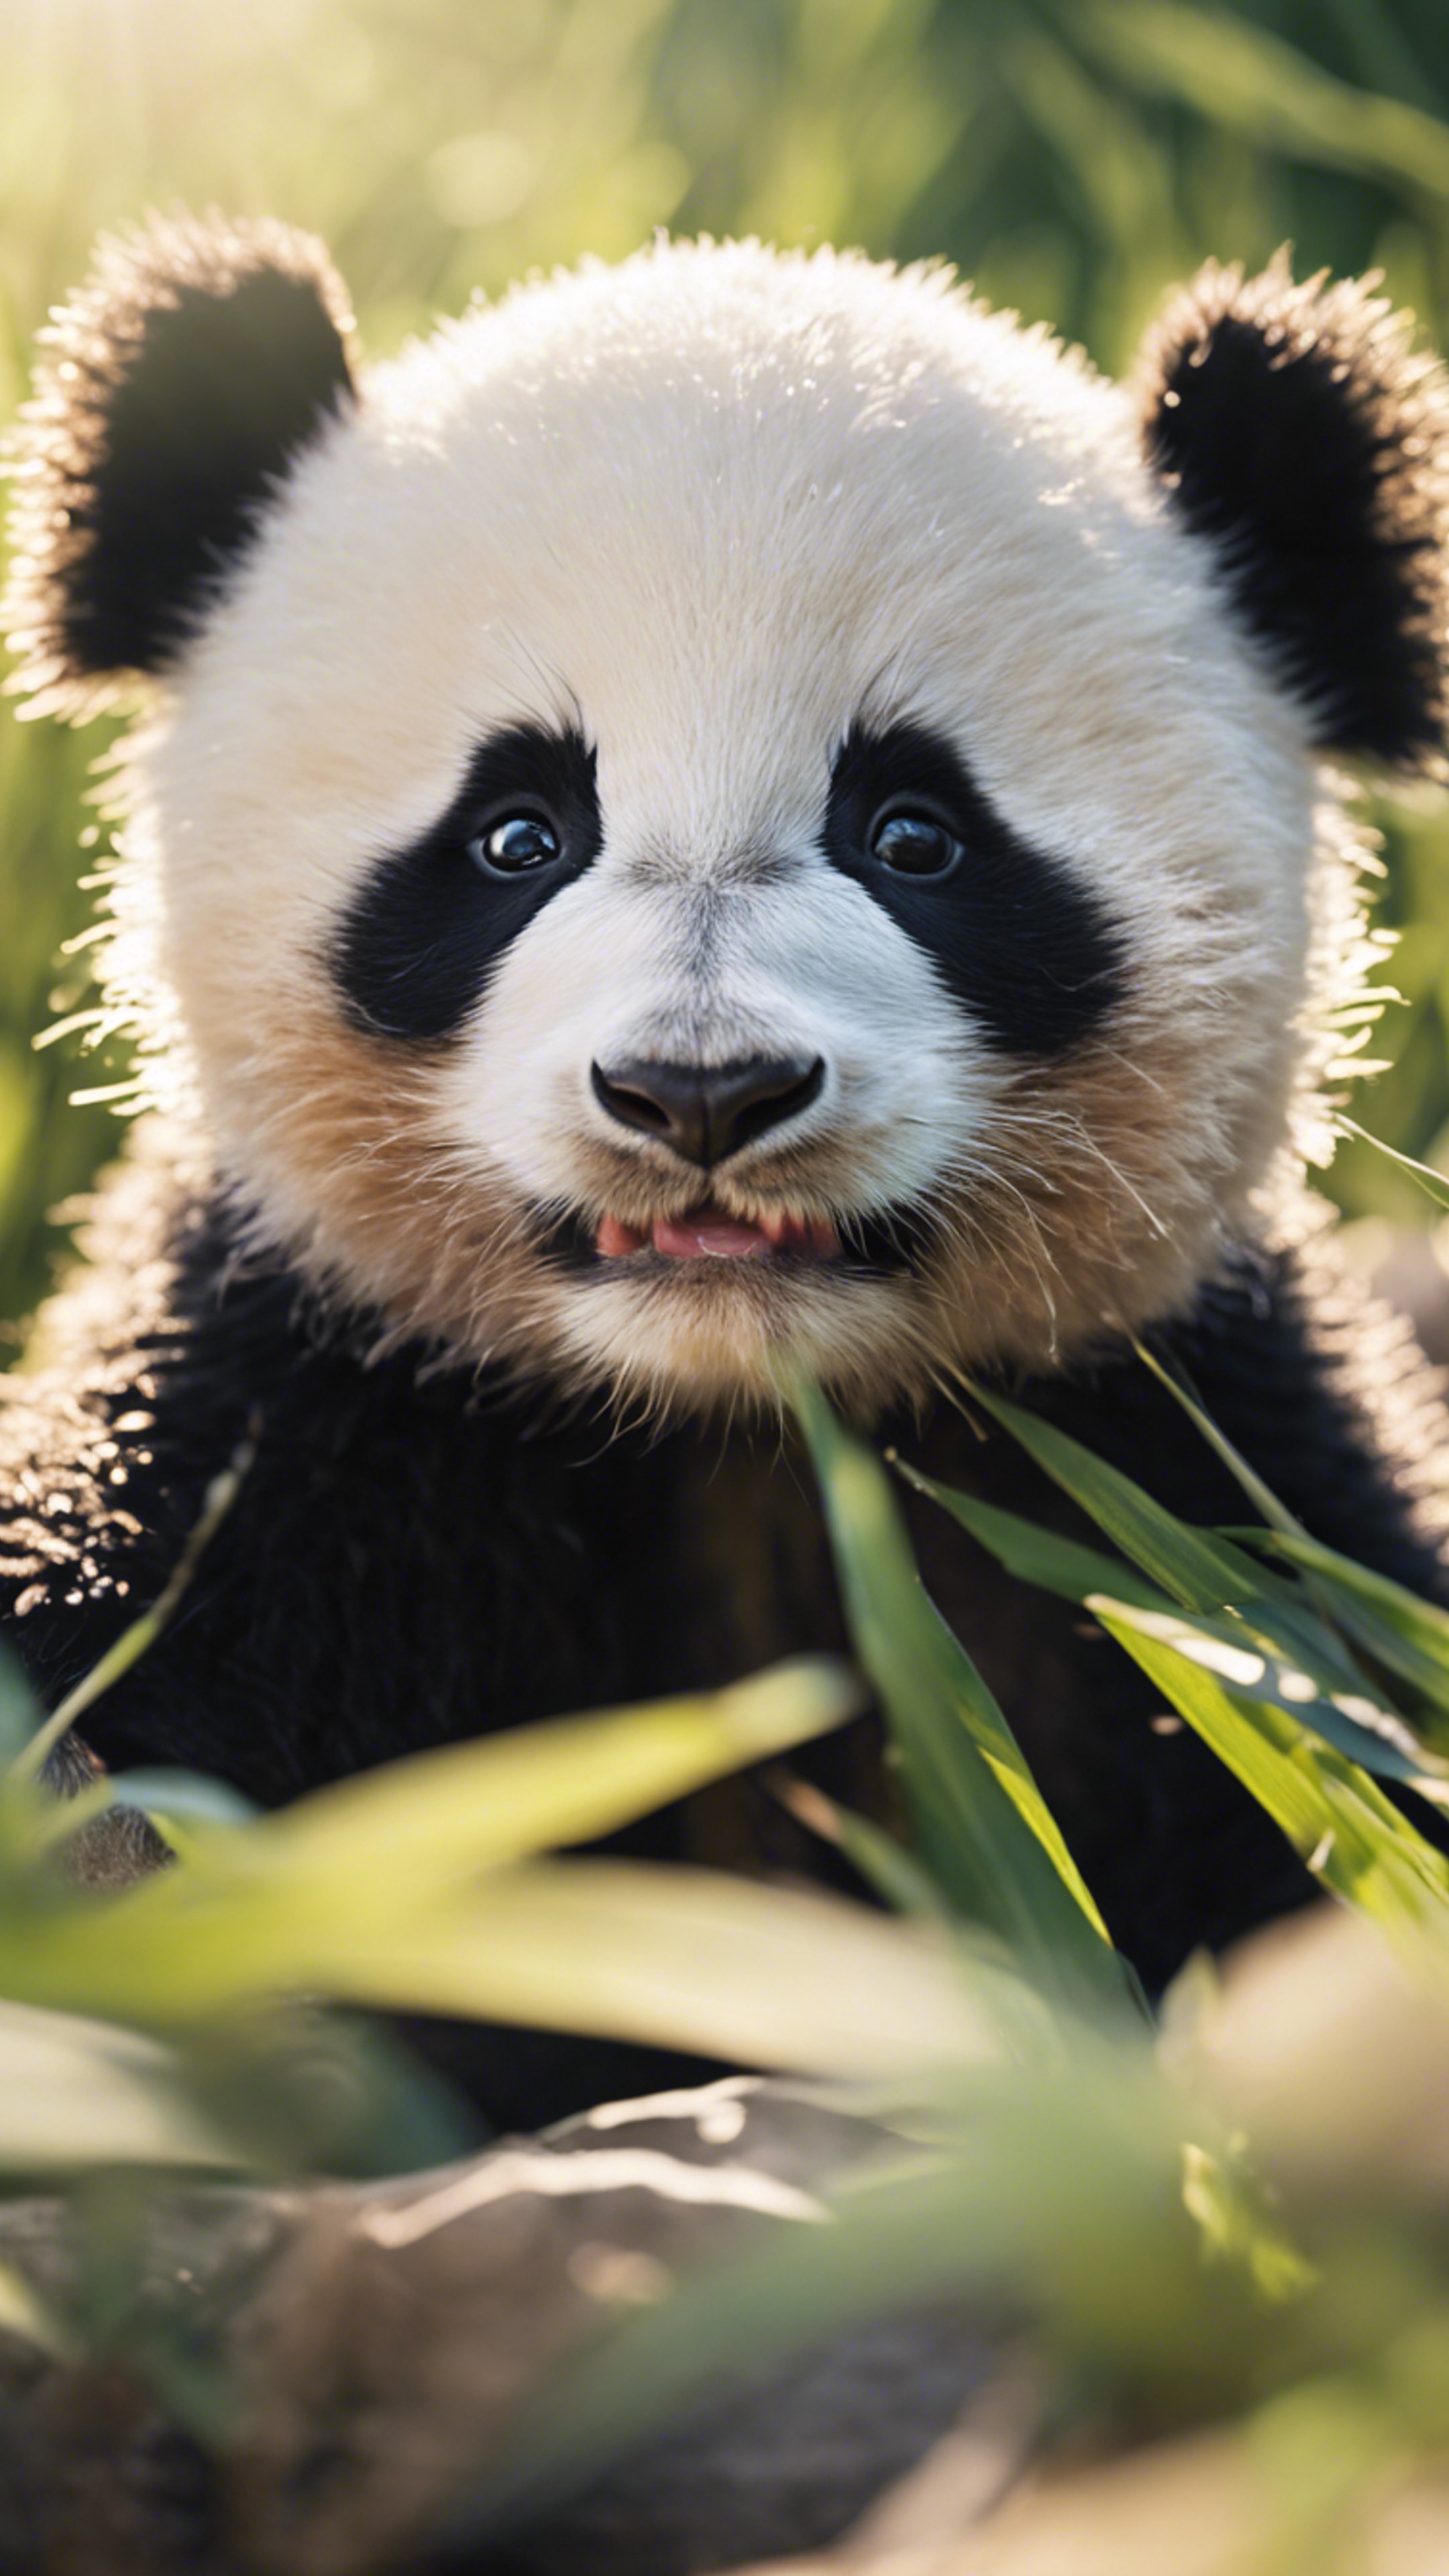 A cheeky panda cub pulling a funny face, under the warm and inviting summer sun. Ταπετσαρία[260c49d866ff4dc685e3]